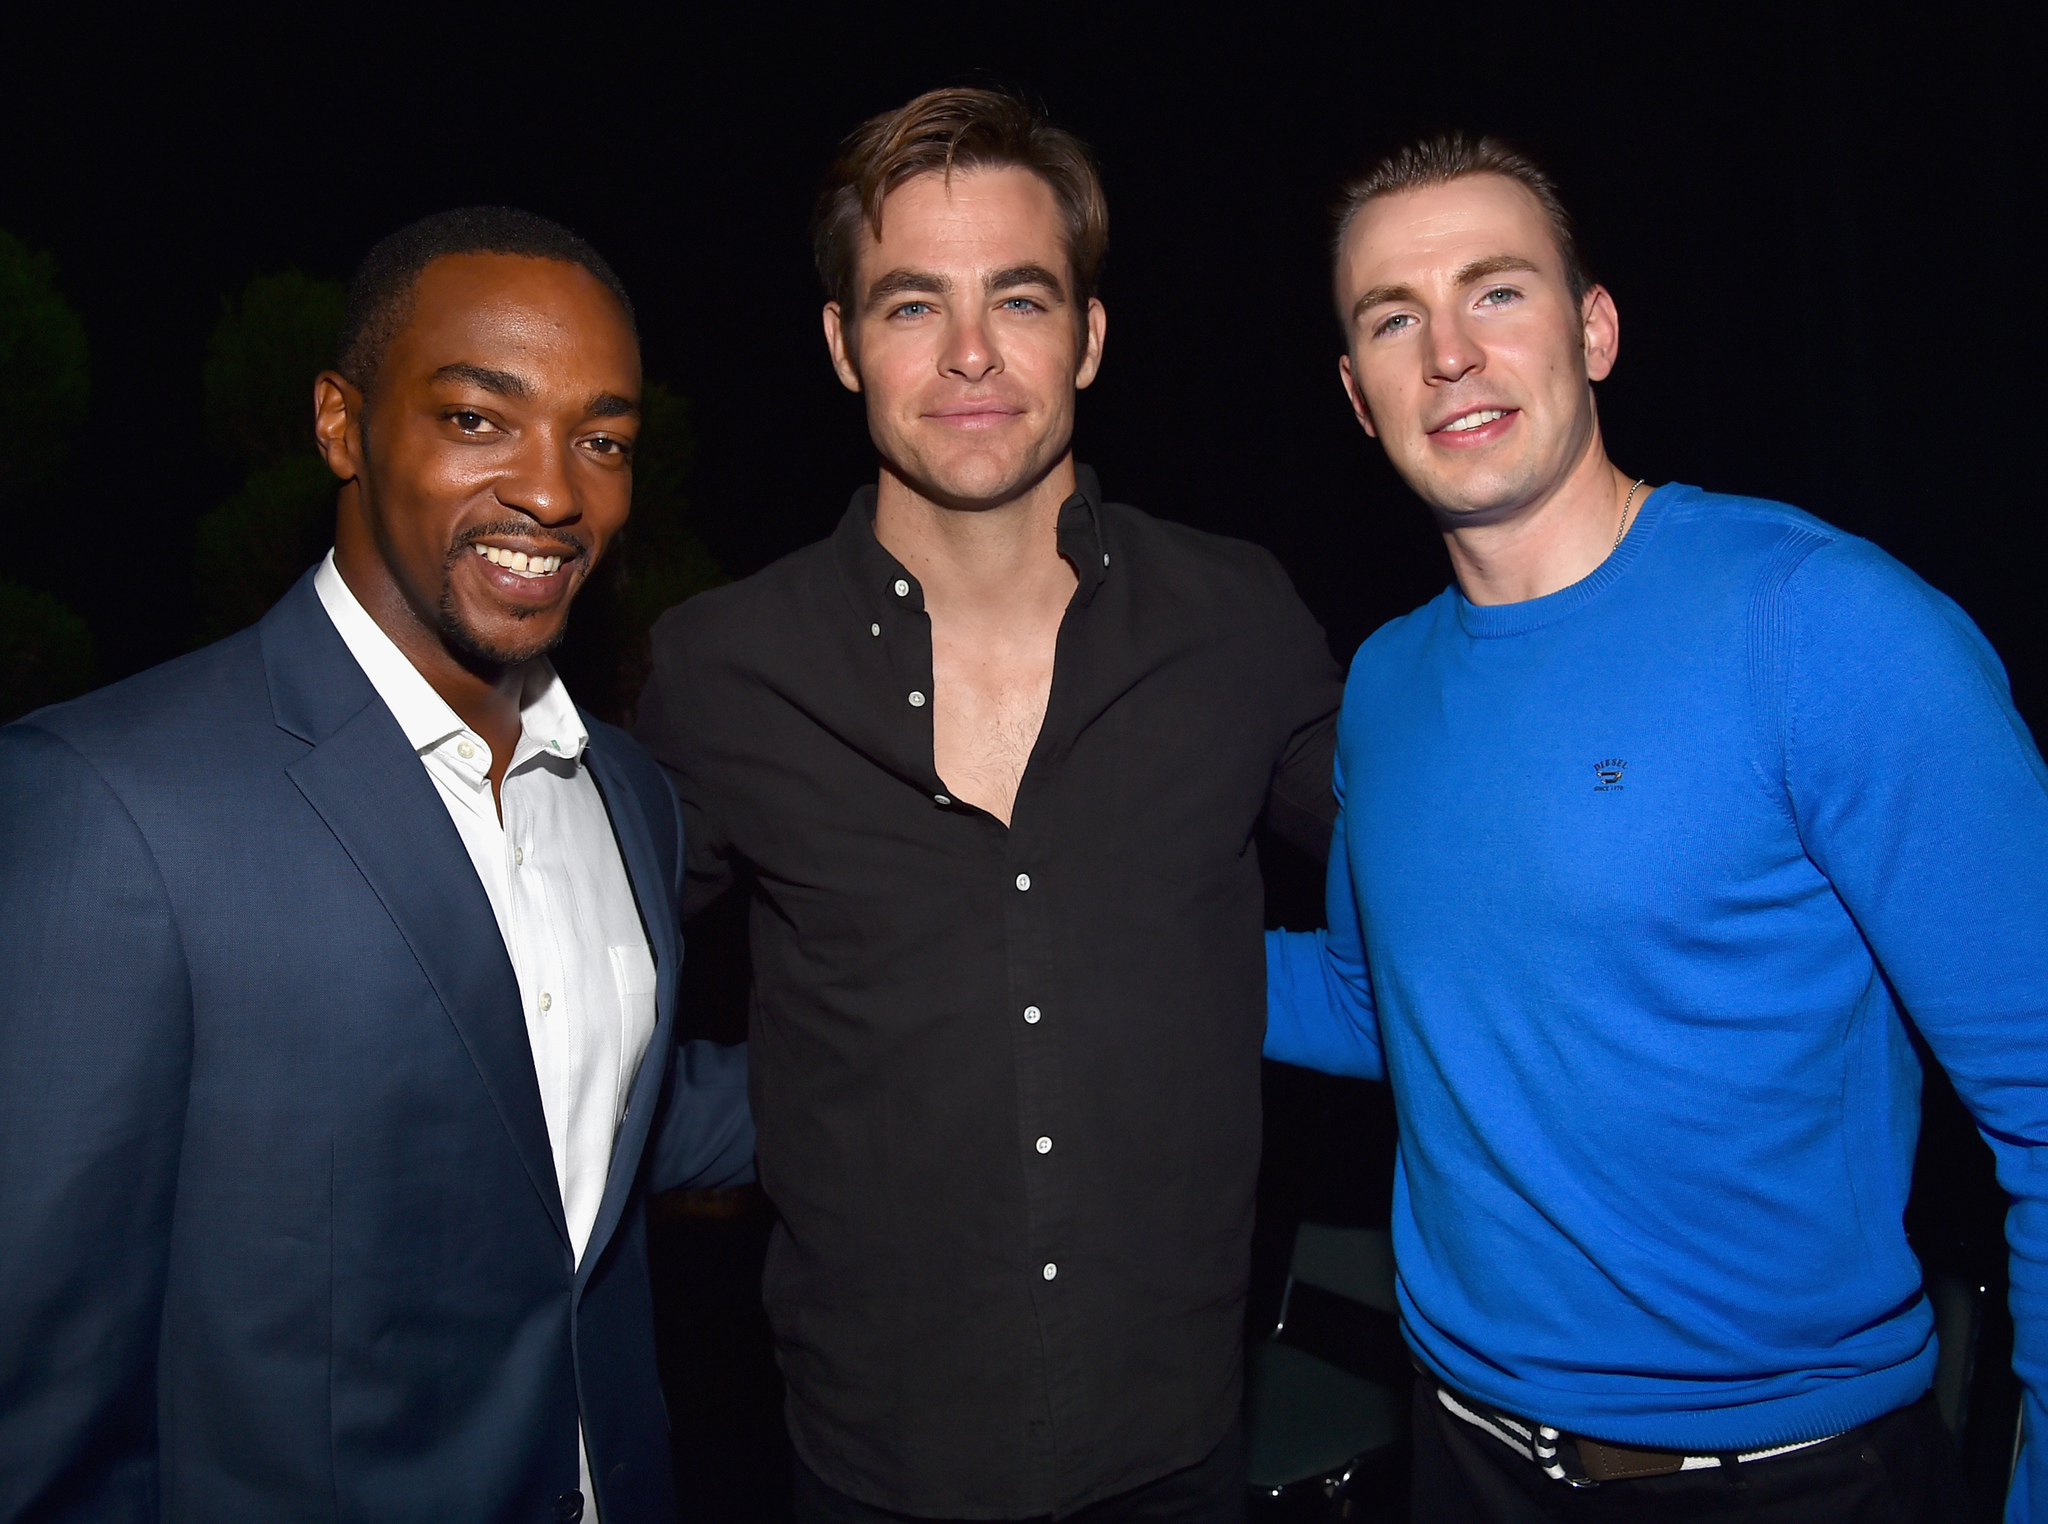 Chris Evans, Anthony Mackie and Chris Pine at event of Captain America: Civil War (2016)